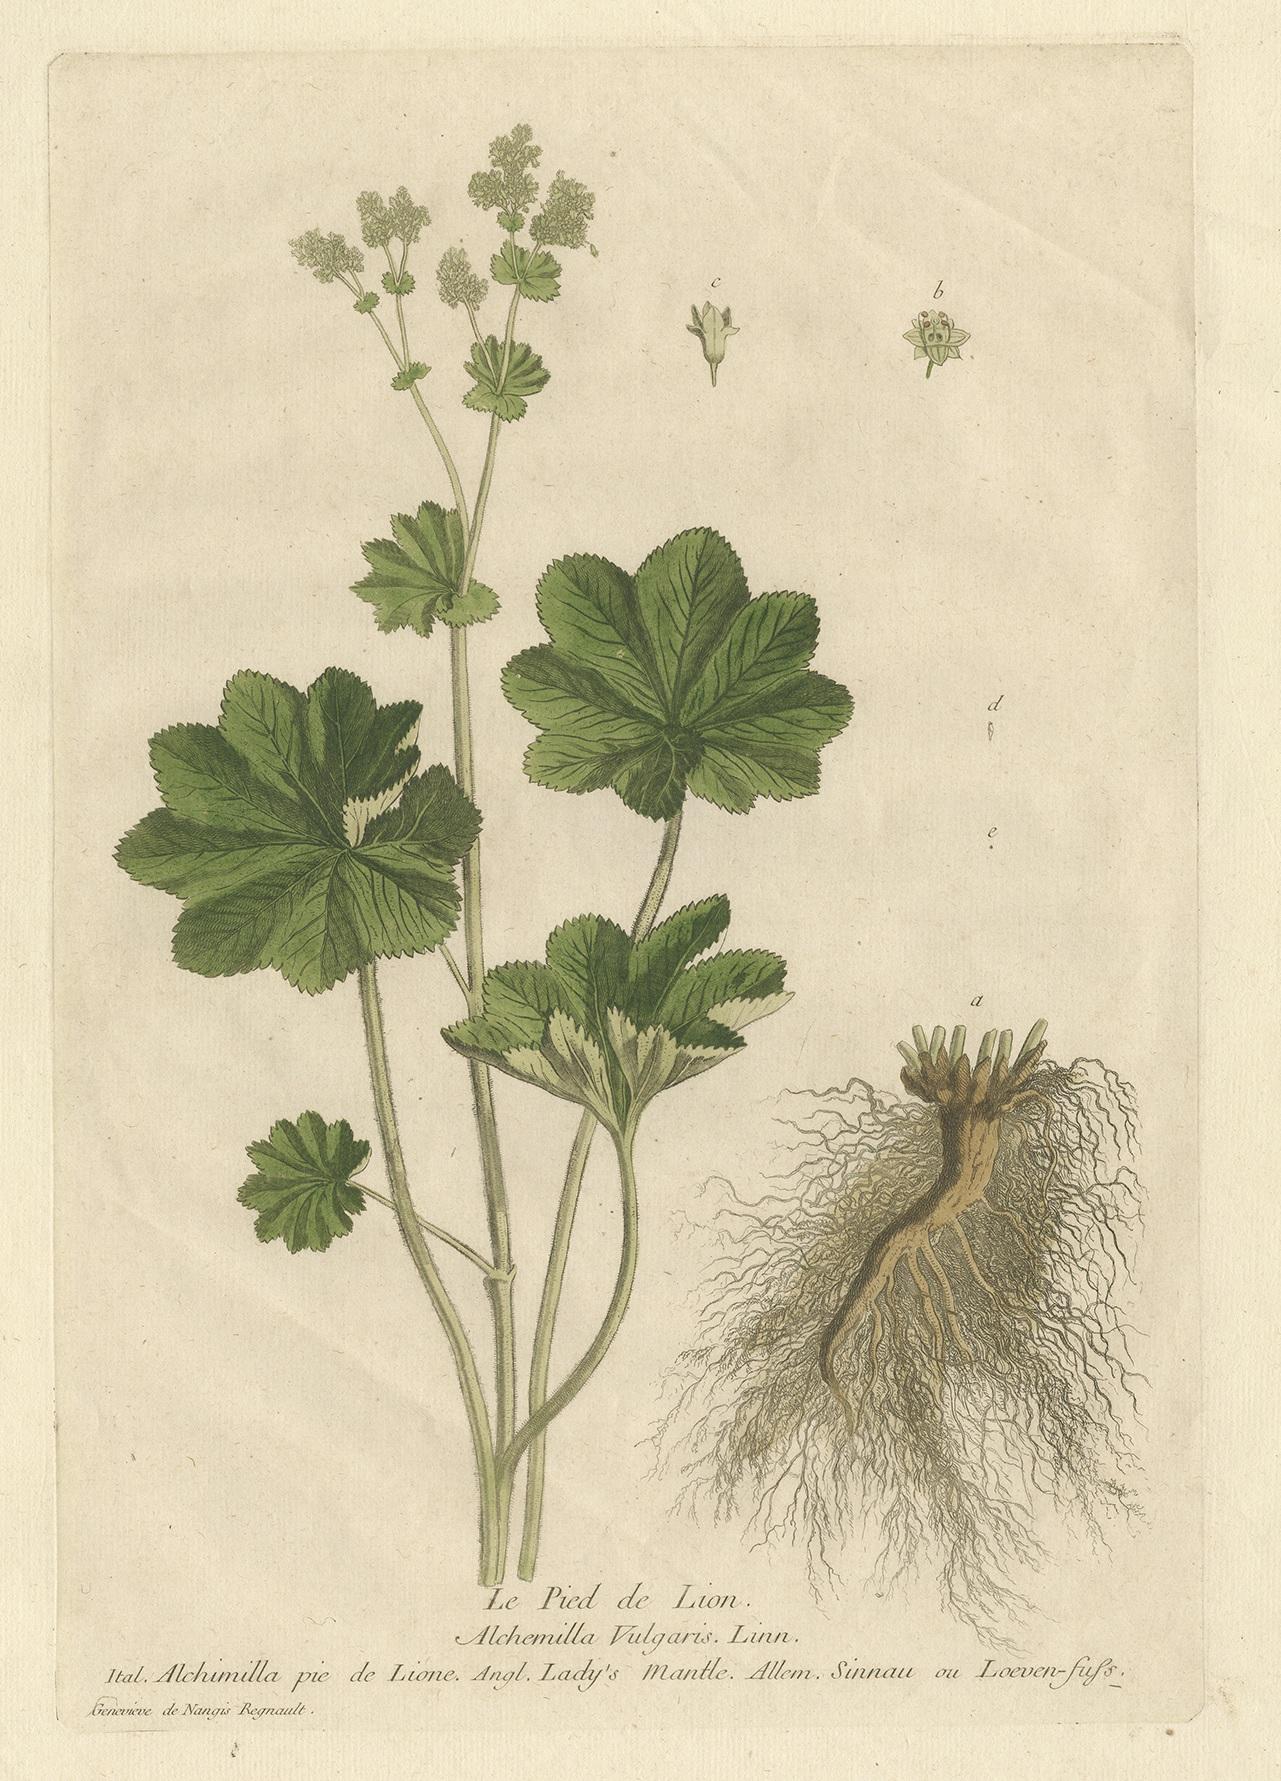 Antique print titled 'Le Pied de Lion (..)'. Beautiful copper engraving of the alchemilla plant. Originates from 'La Botanique', a French botanical book. Drawn and engraved by Regnault's wife Geneviève.